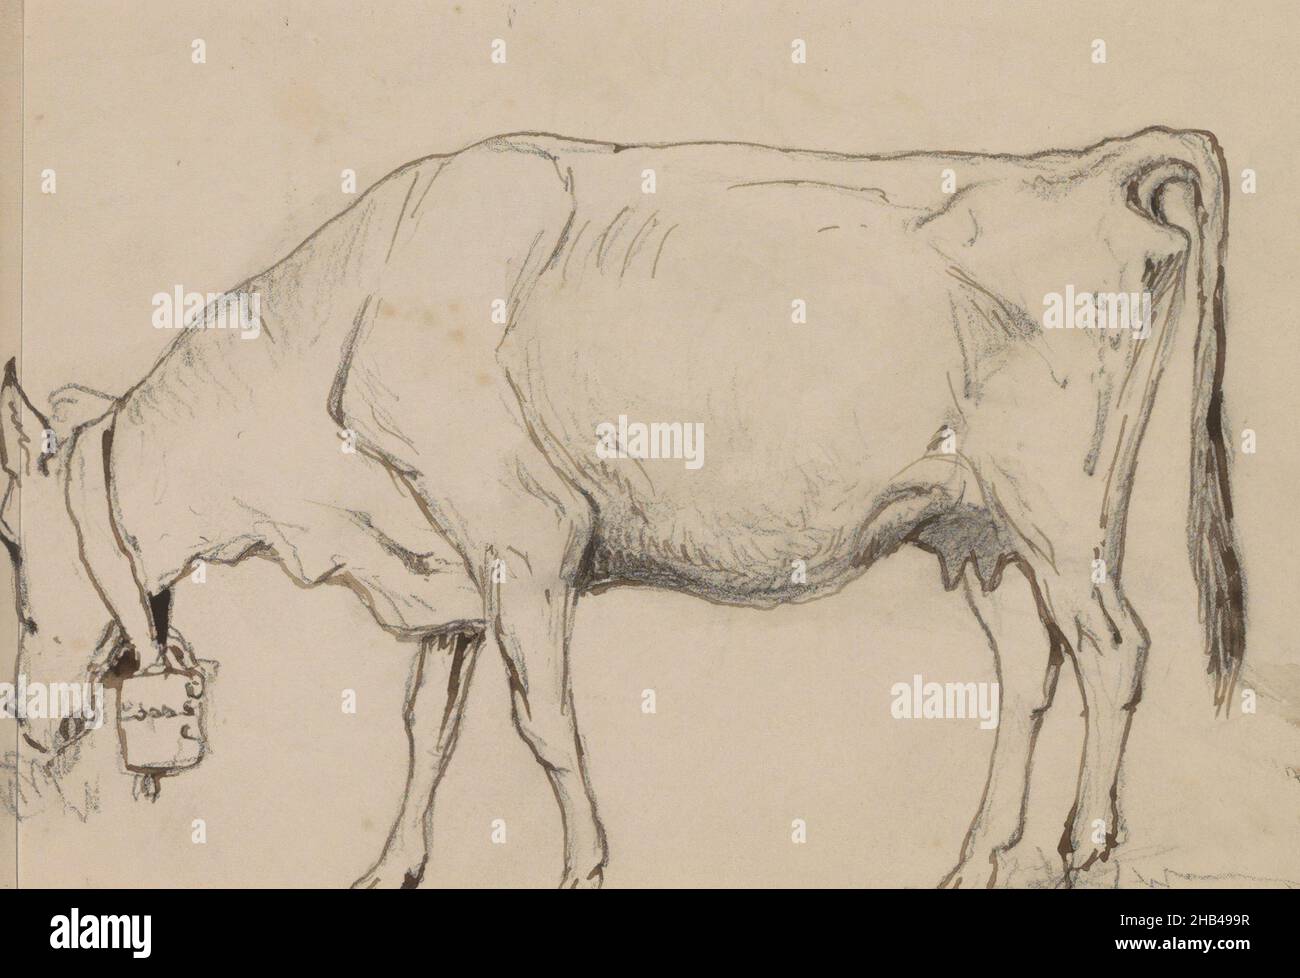 Sheet 4 recto from a sketchbook with 47 sheets, Cow with a bell around the neck, seen from the side., Johannes Tavenraat, 1858 Stock Photo